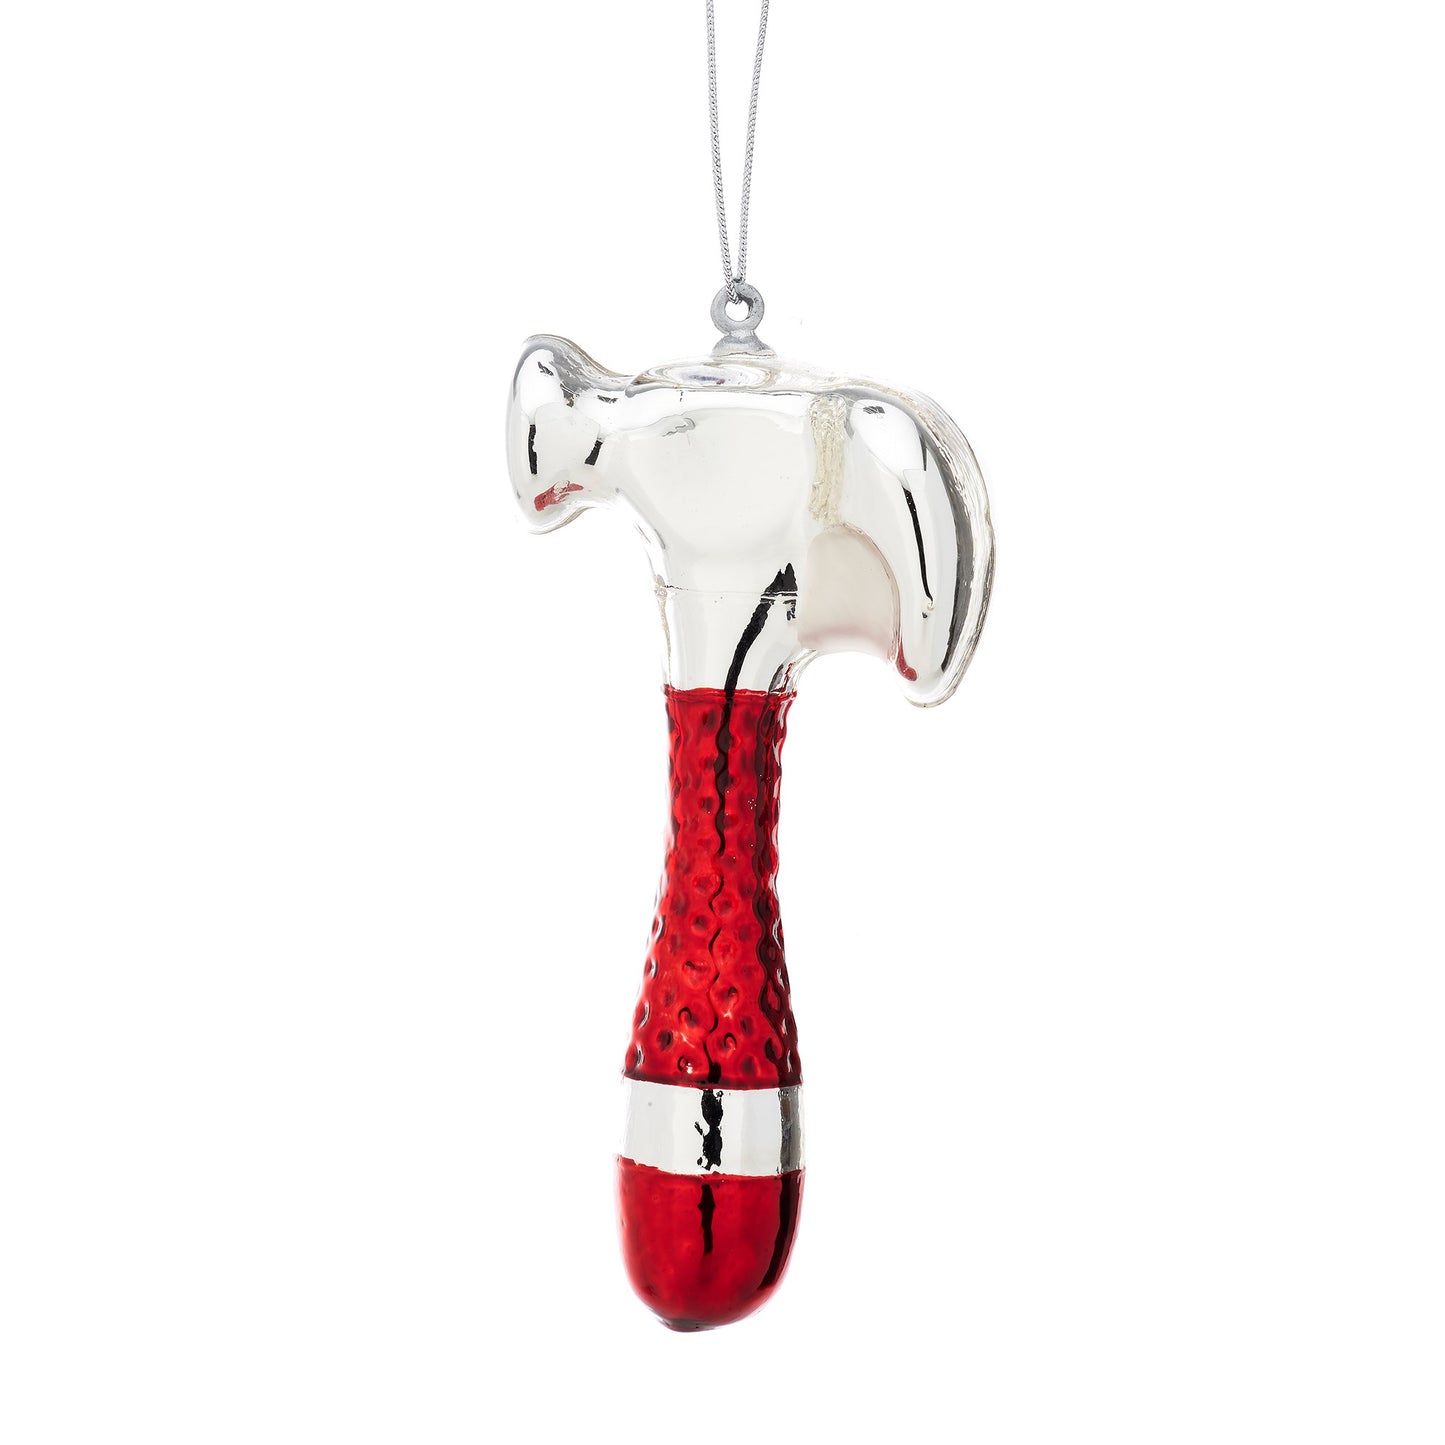 A red and silver hammer (yes, you read that right!) Christmas decoration to be hung on your tree or in your home. Fun, festive gift for any DIY enthusiasts!